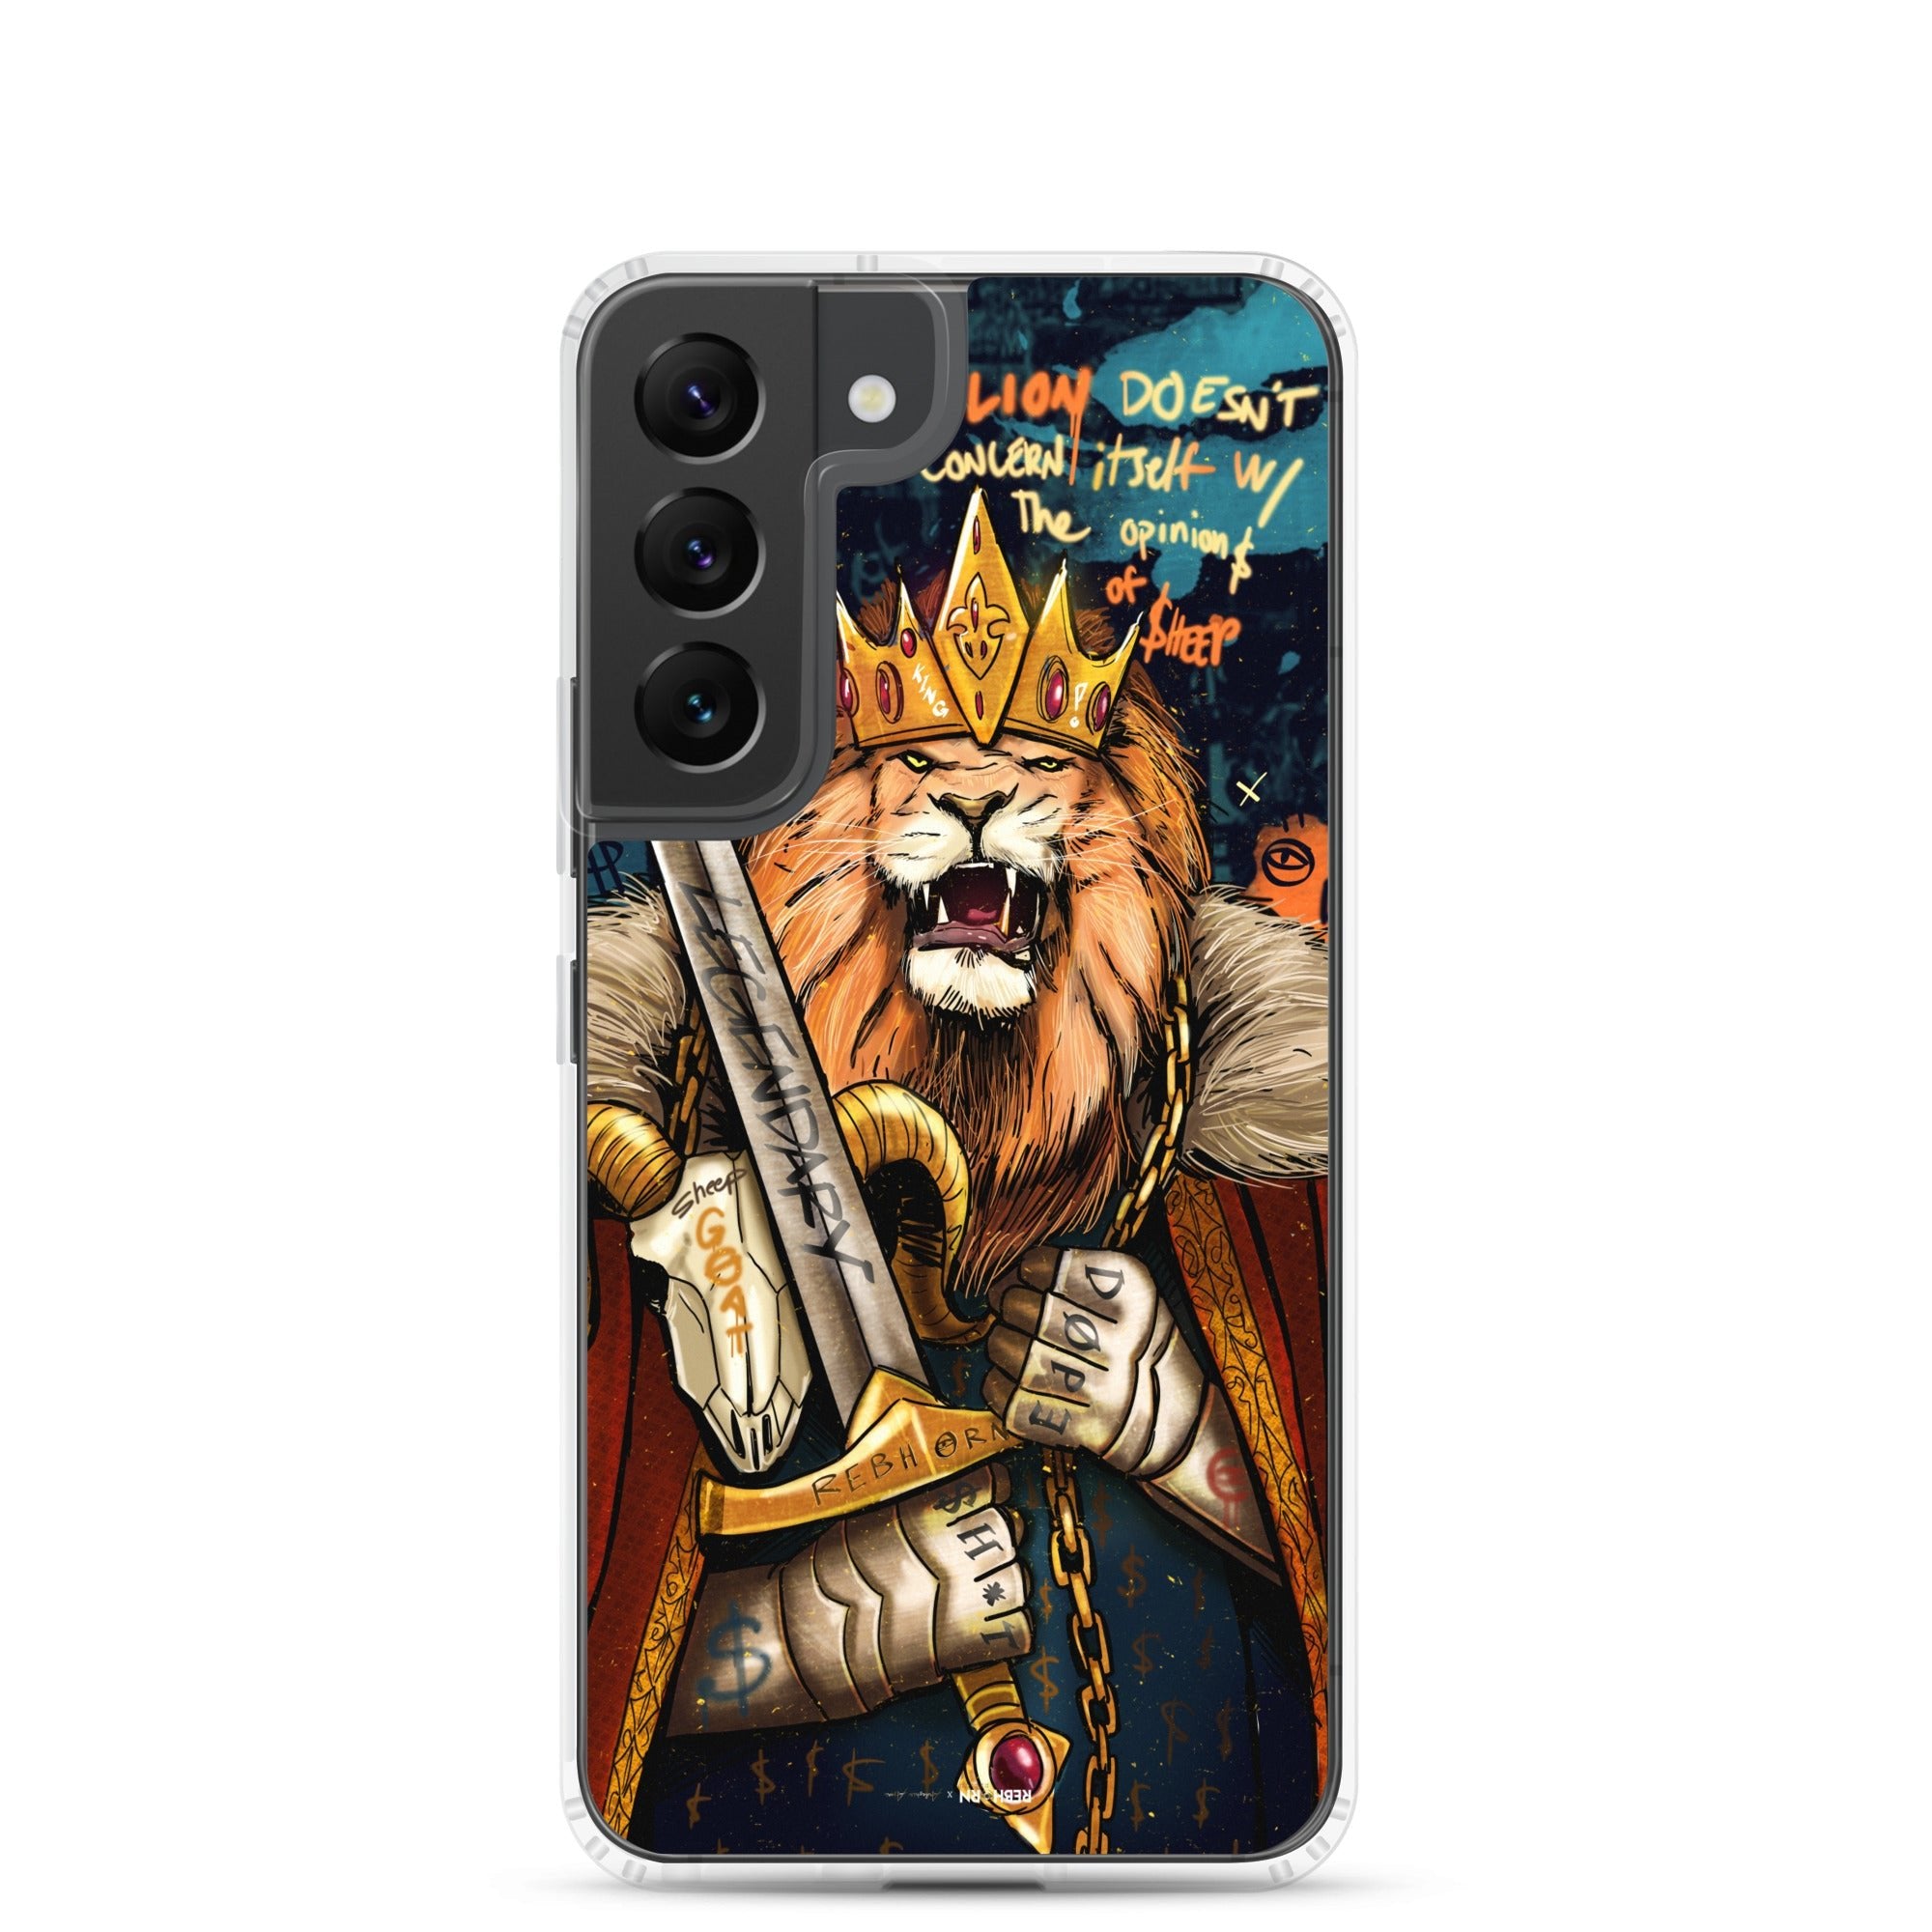 A Lion Doesn't Concern Itself with the Opinions of Sheep Samsung Case - REBHORN DESIGN